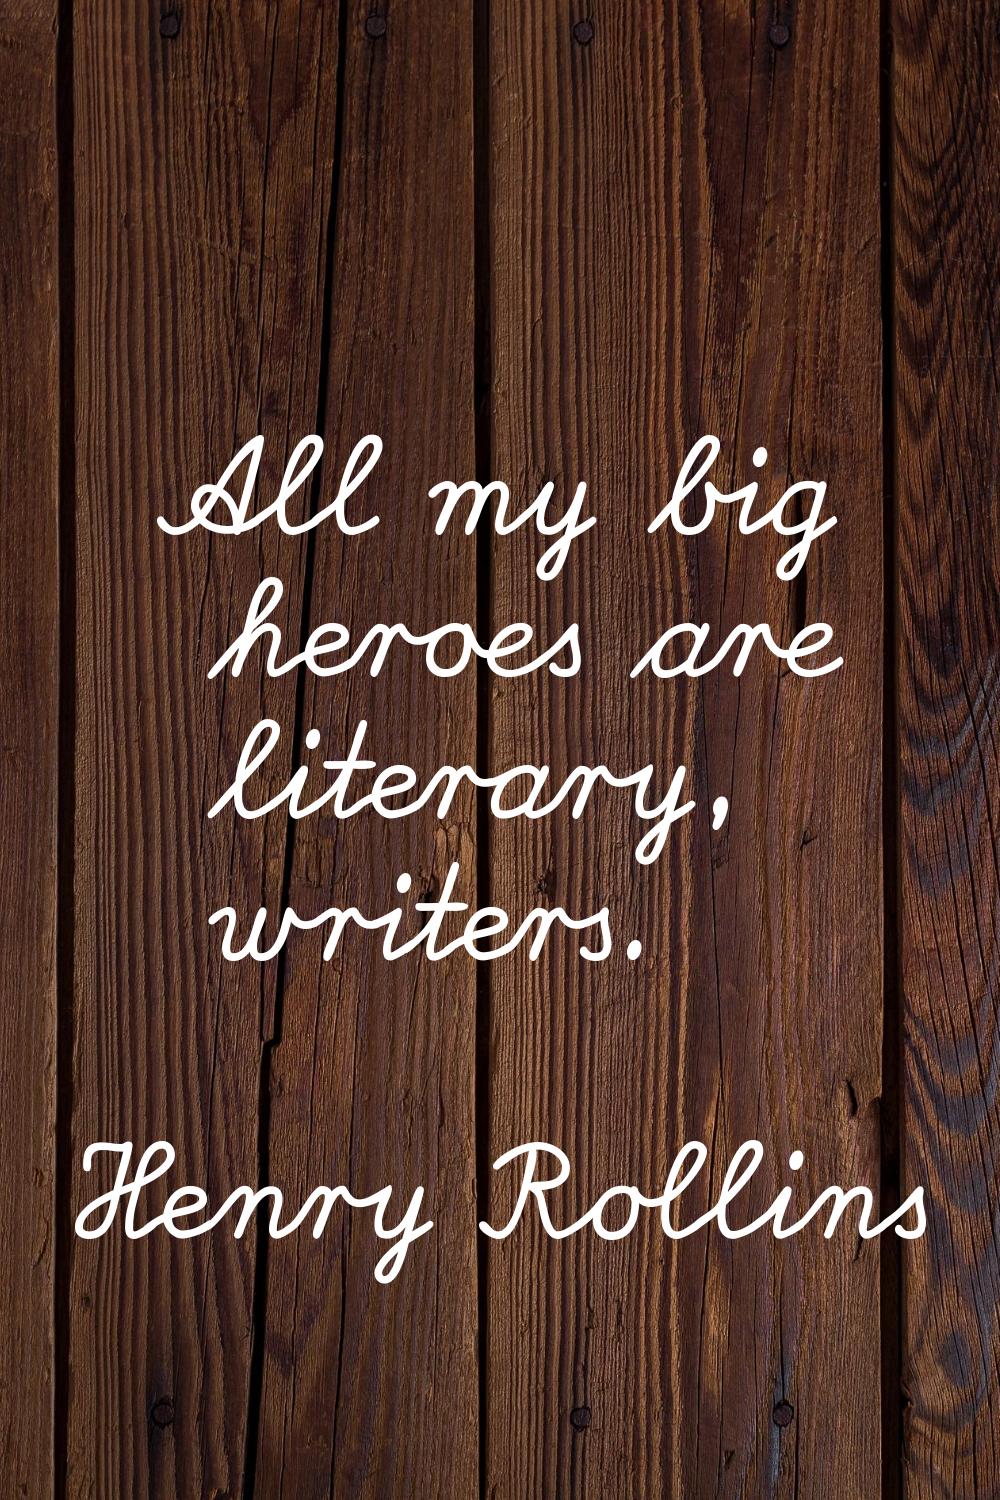 All my big heroes are literary, writers.